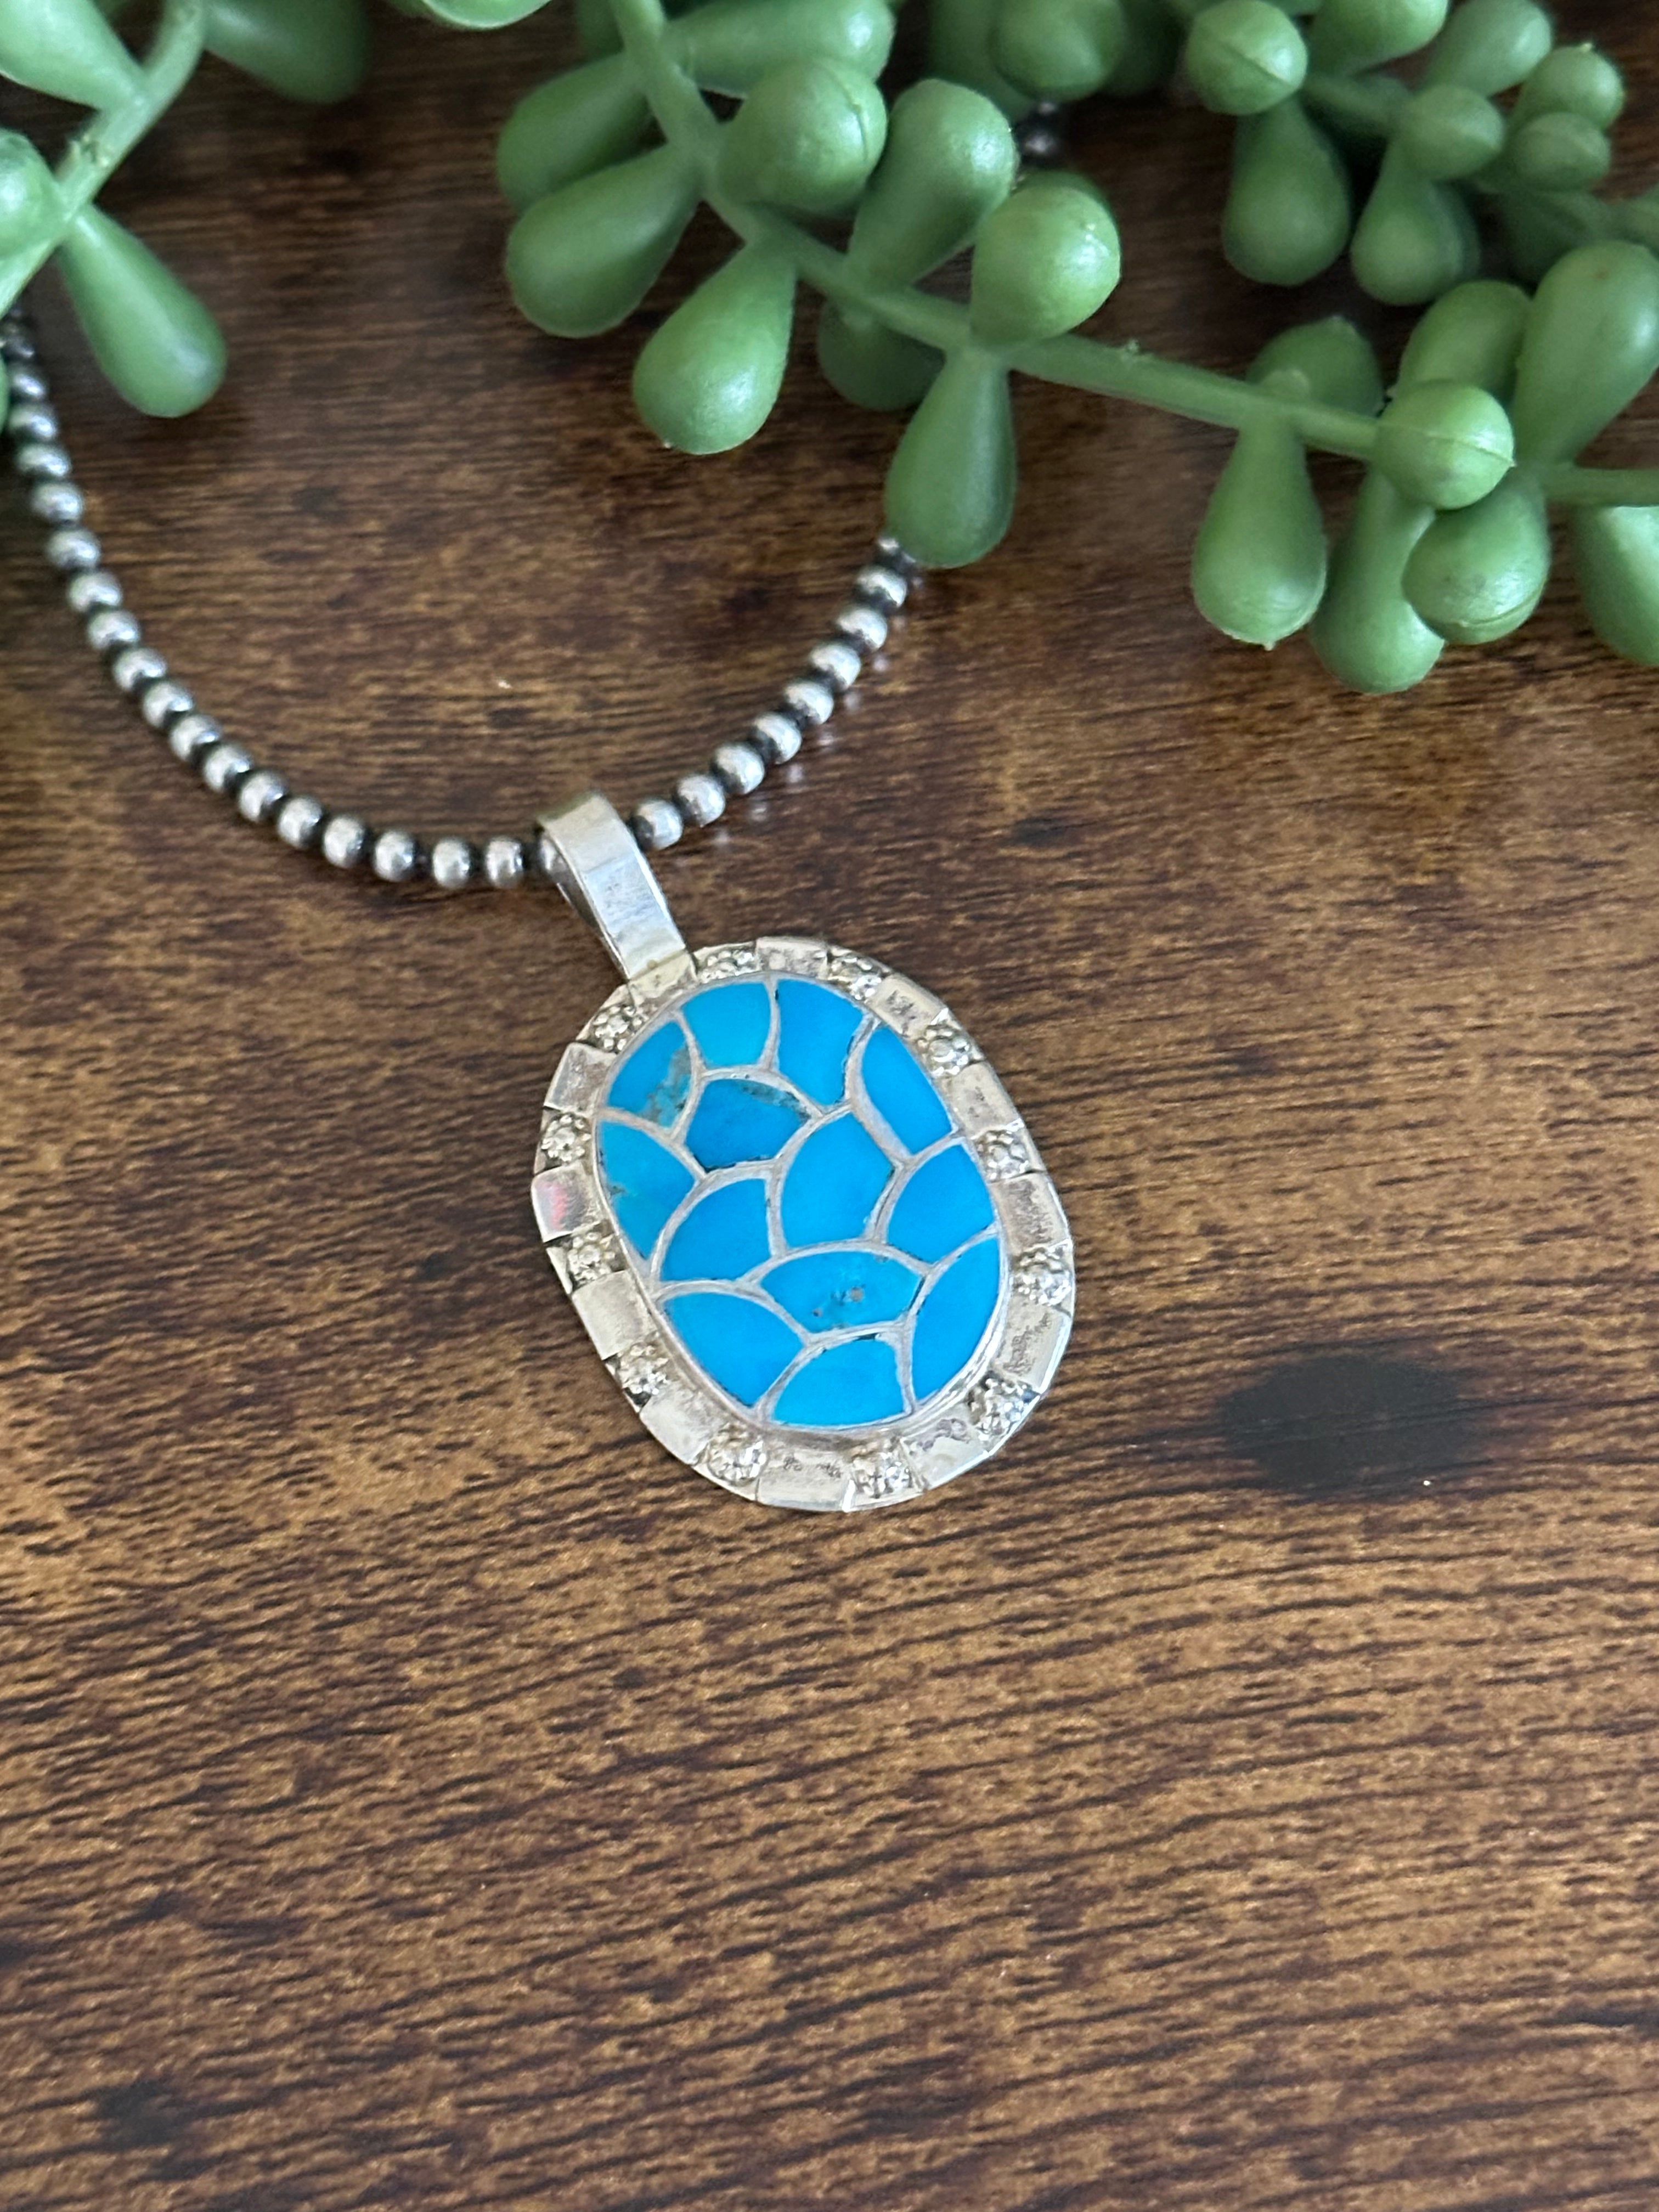 Zuni Handmade Turquoise & Sterling Silver Inlay Pendant